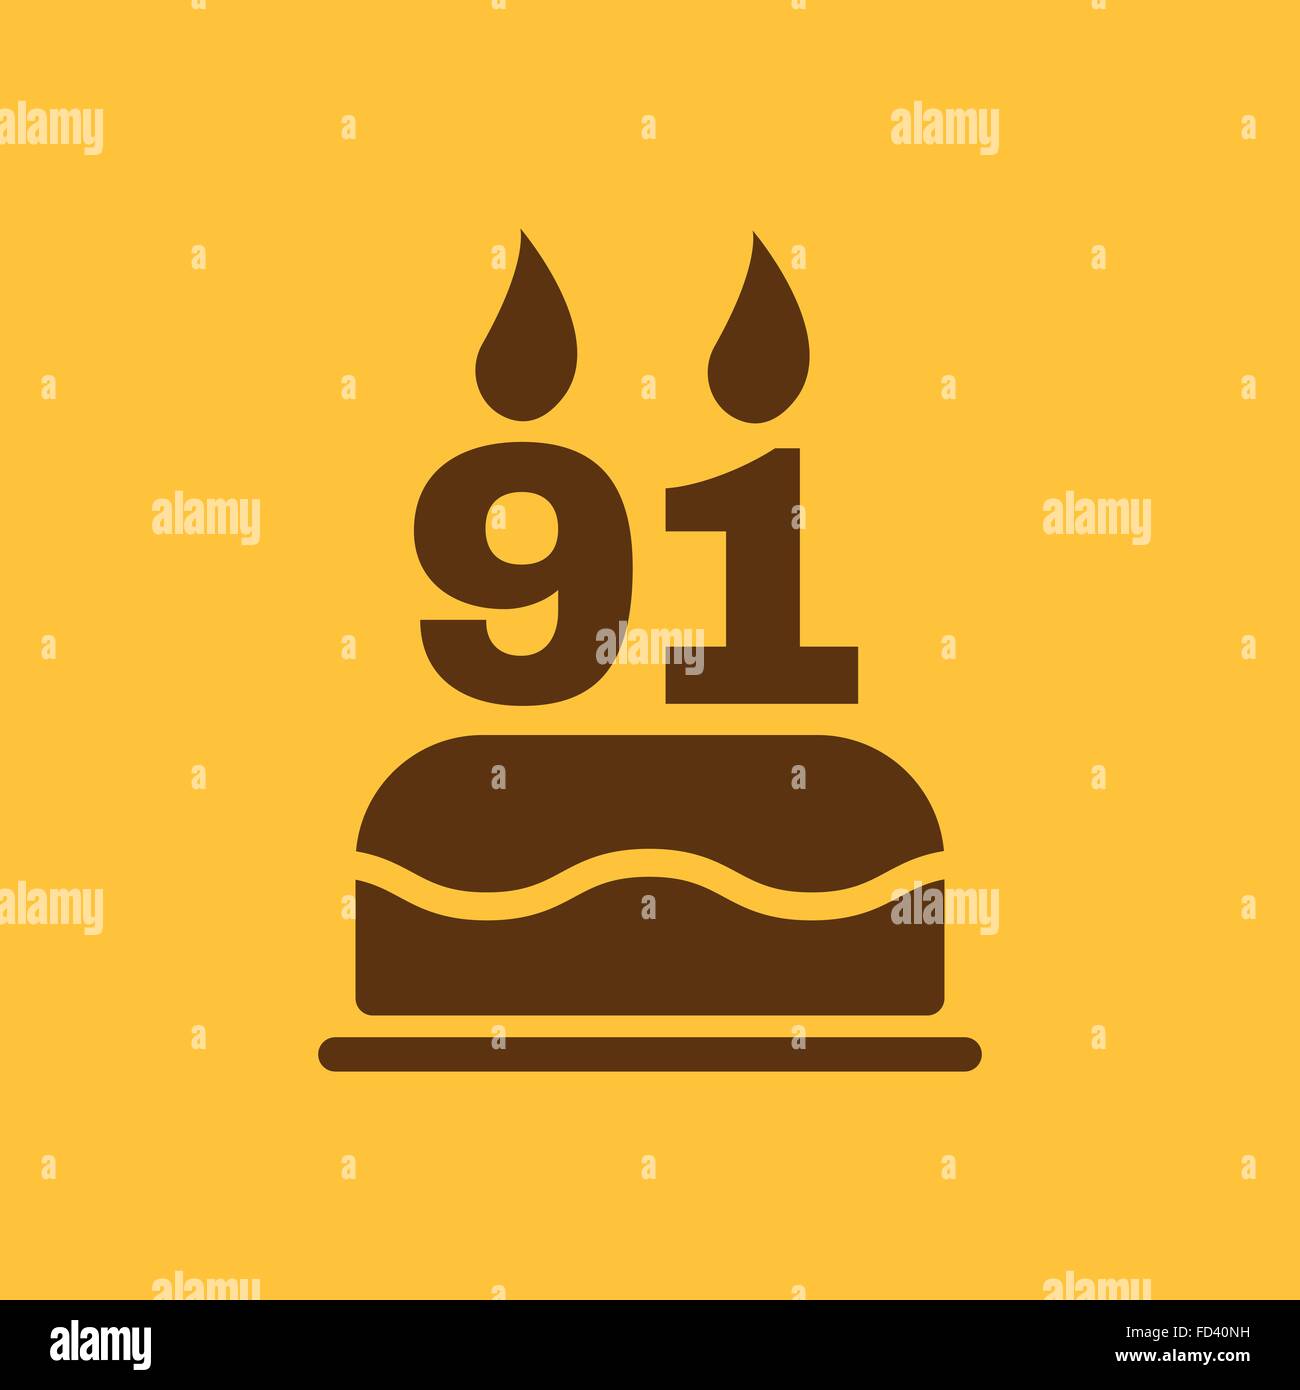 The birthday cake with candles in the form of number 91 icon. Birthday symbol. Flat Stock Vector